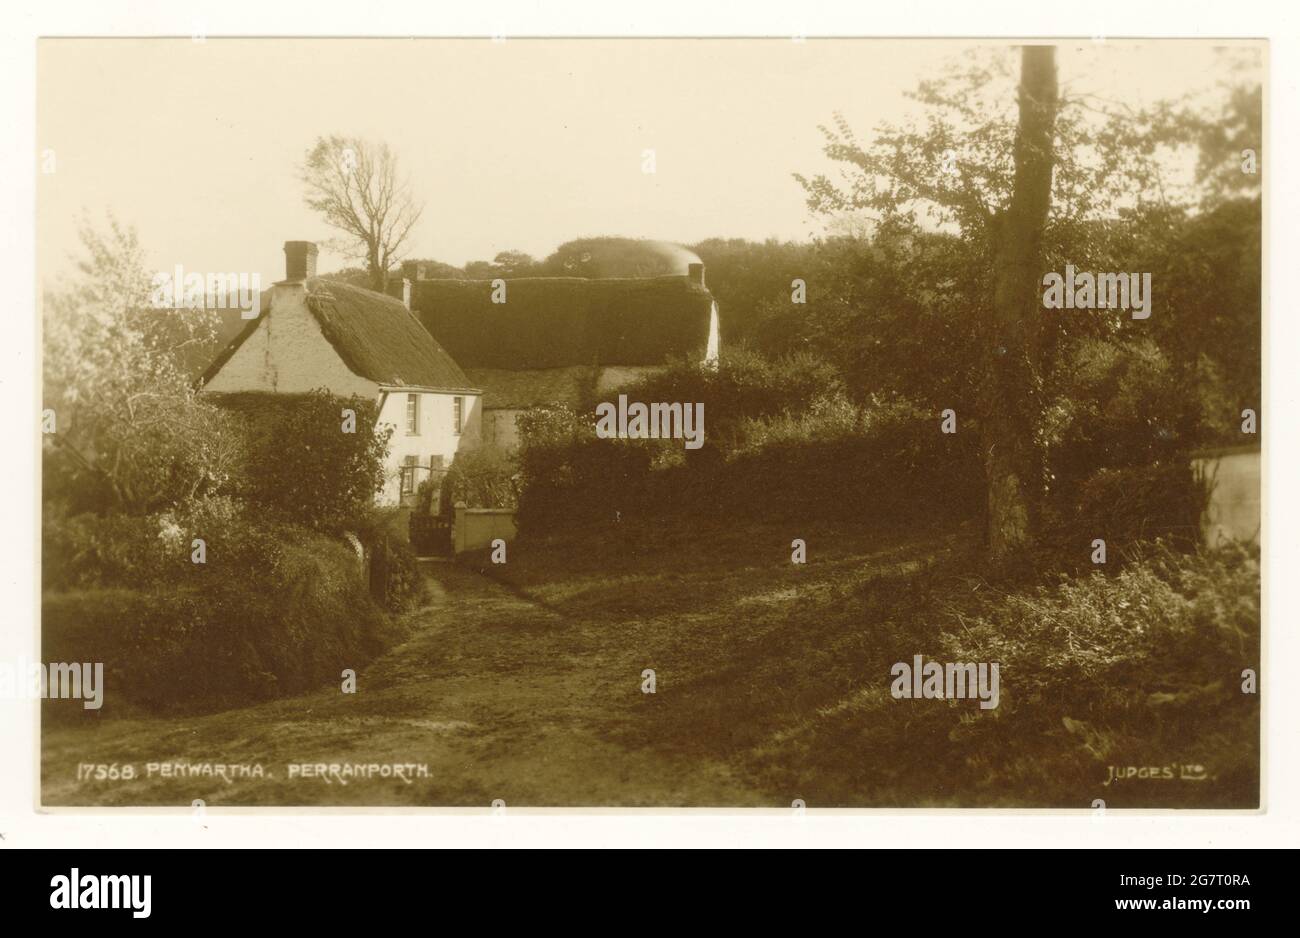 Original early 1900's postcard of idyllic view of thatched cottages, Penwartha, an inland hamlet near Perranporth, Cornwall, U.K. Stock Photo